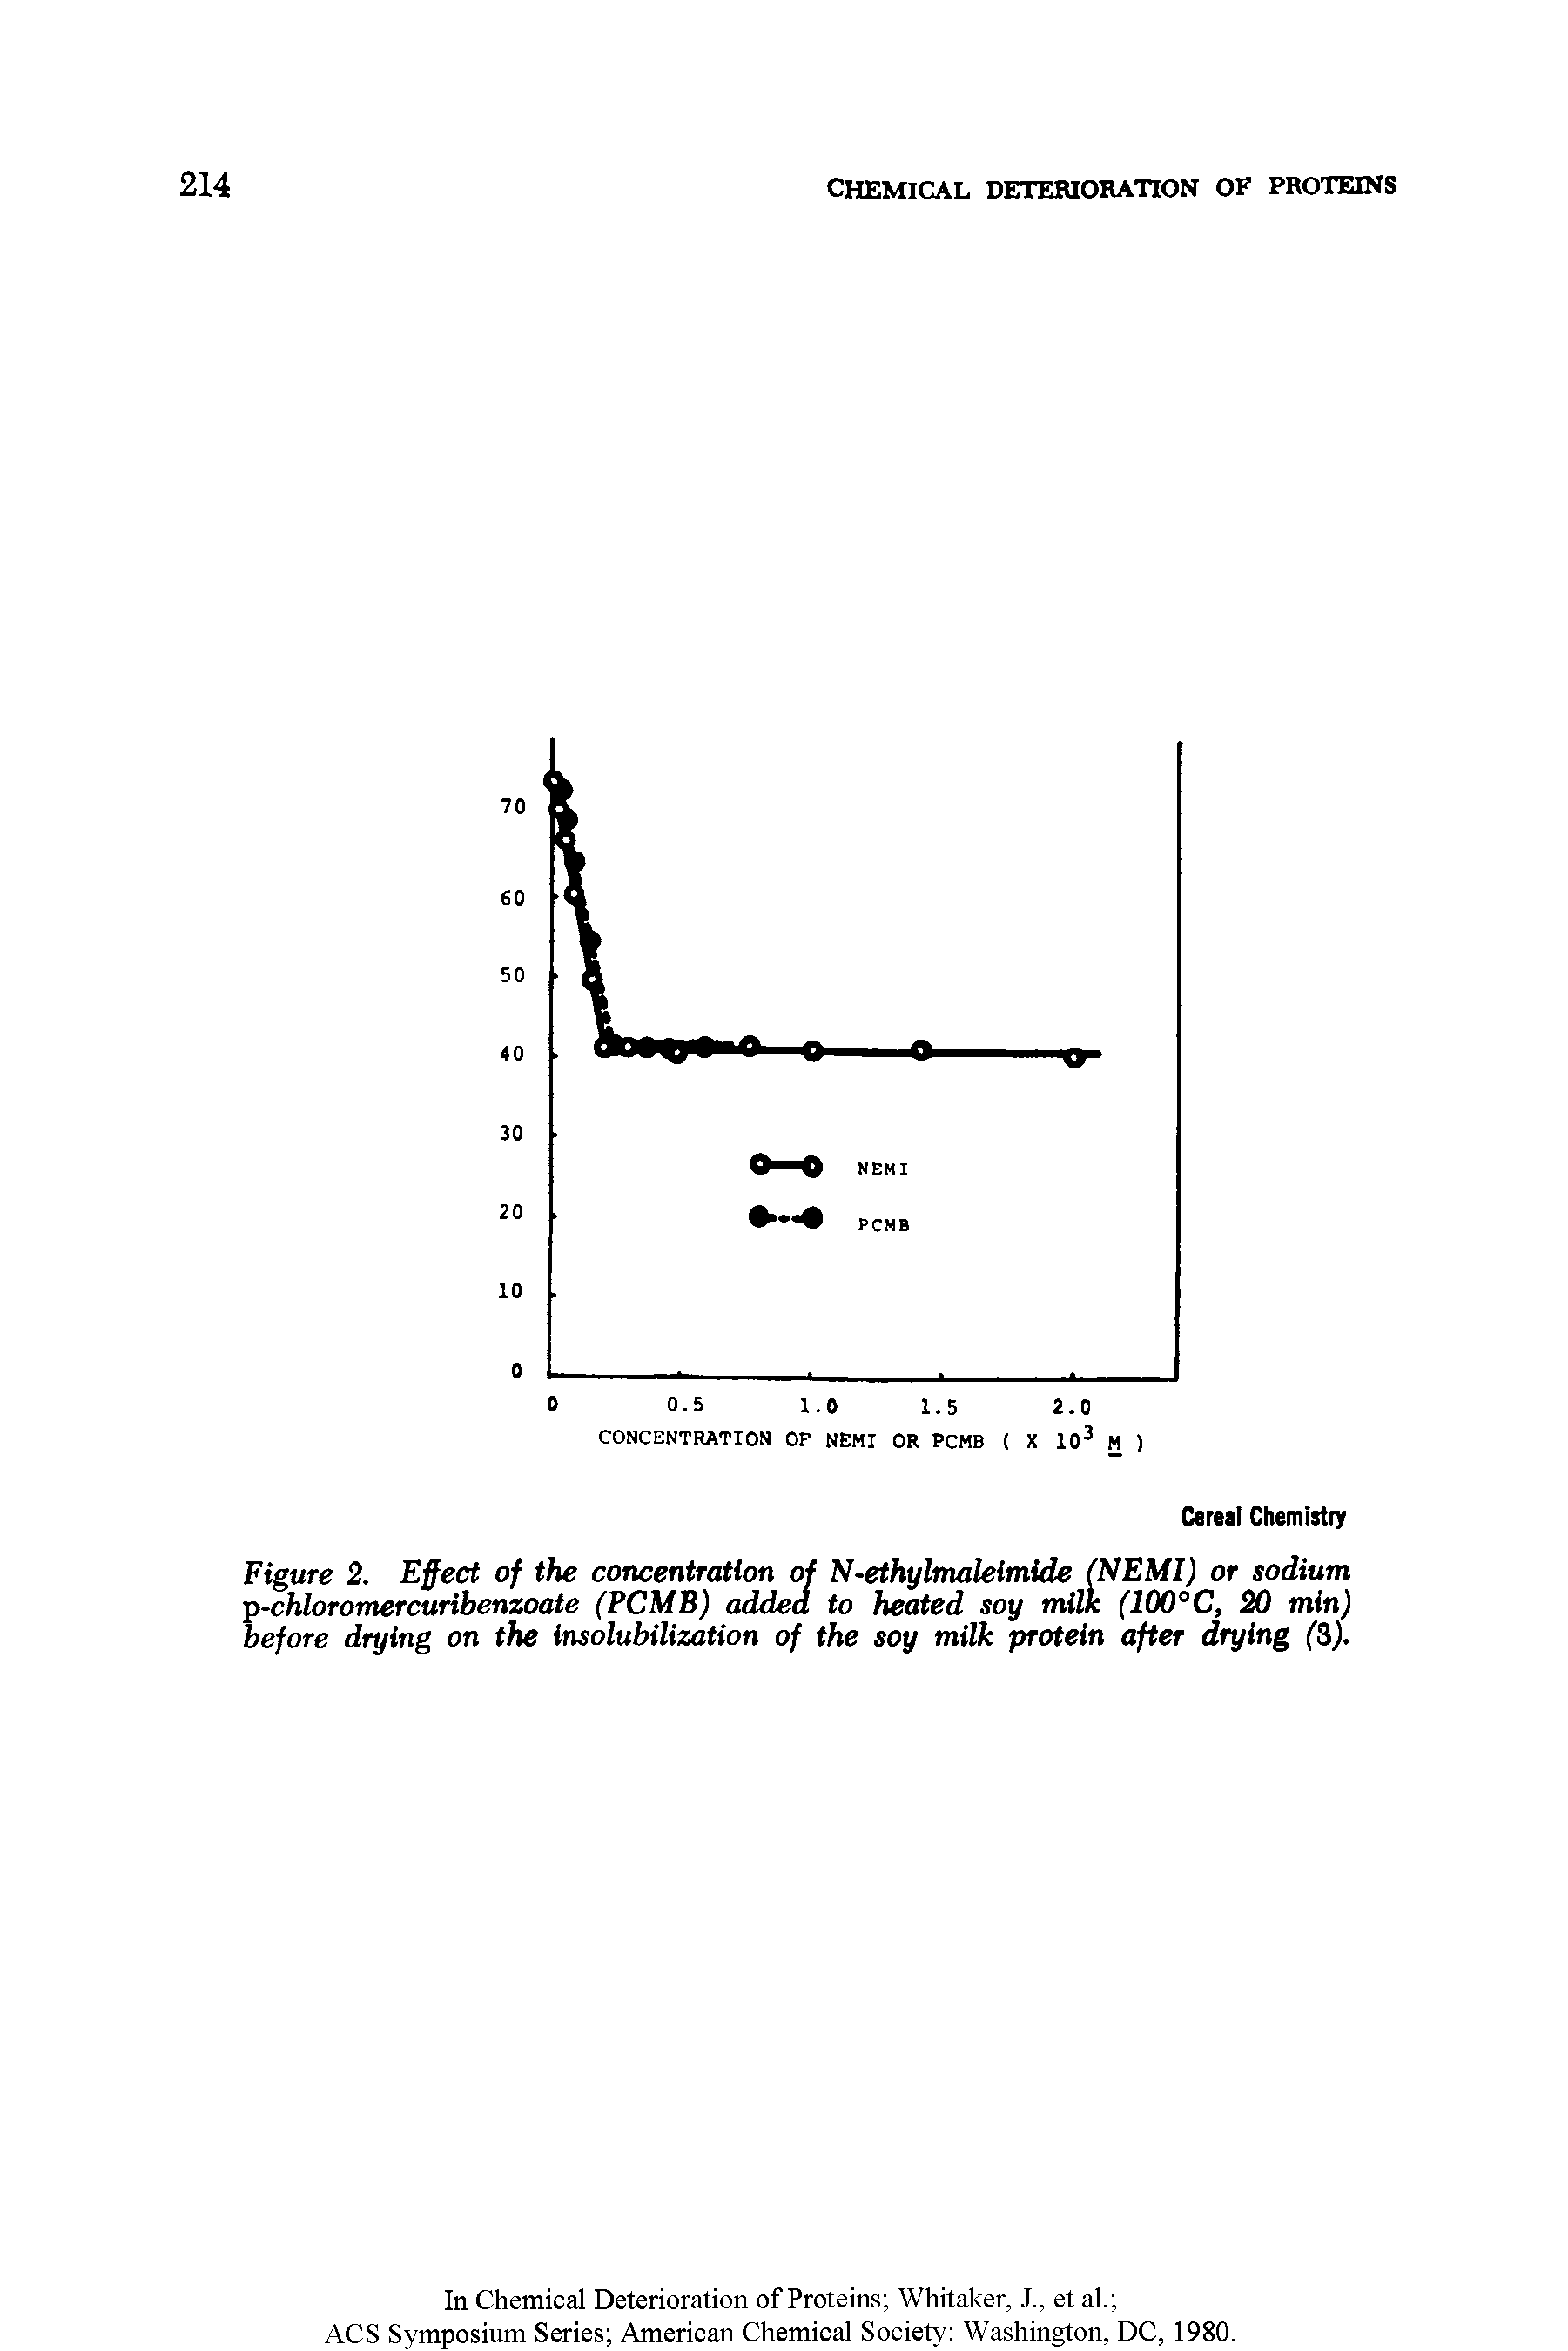 Figure 2. Effect of the concentration of N-ethylmaleimide (NEMI) or sodium p-chloromercuribenzoate (PCMB) addea to heated soy milk (100°C, 20 min) before drying on the insolubilization of the soy milk protein after drying (3).